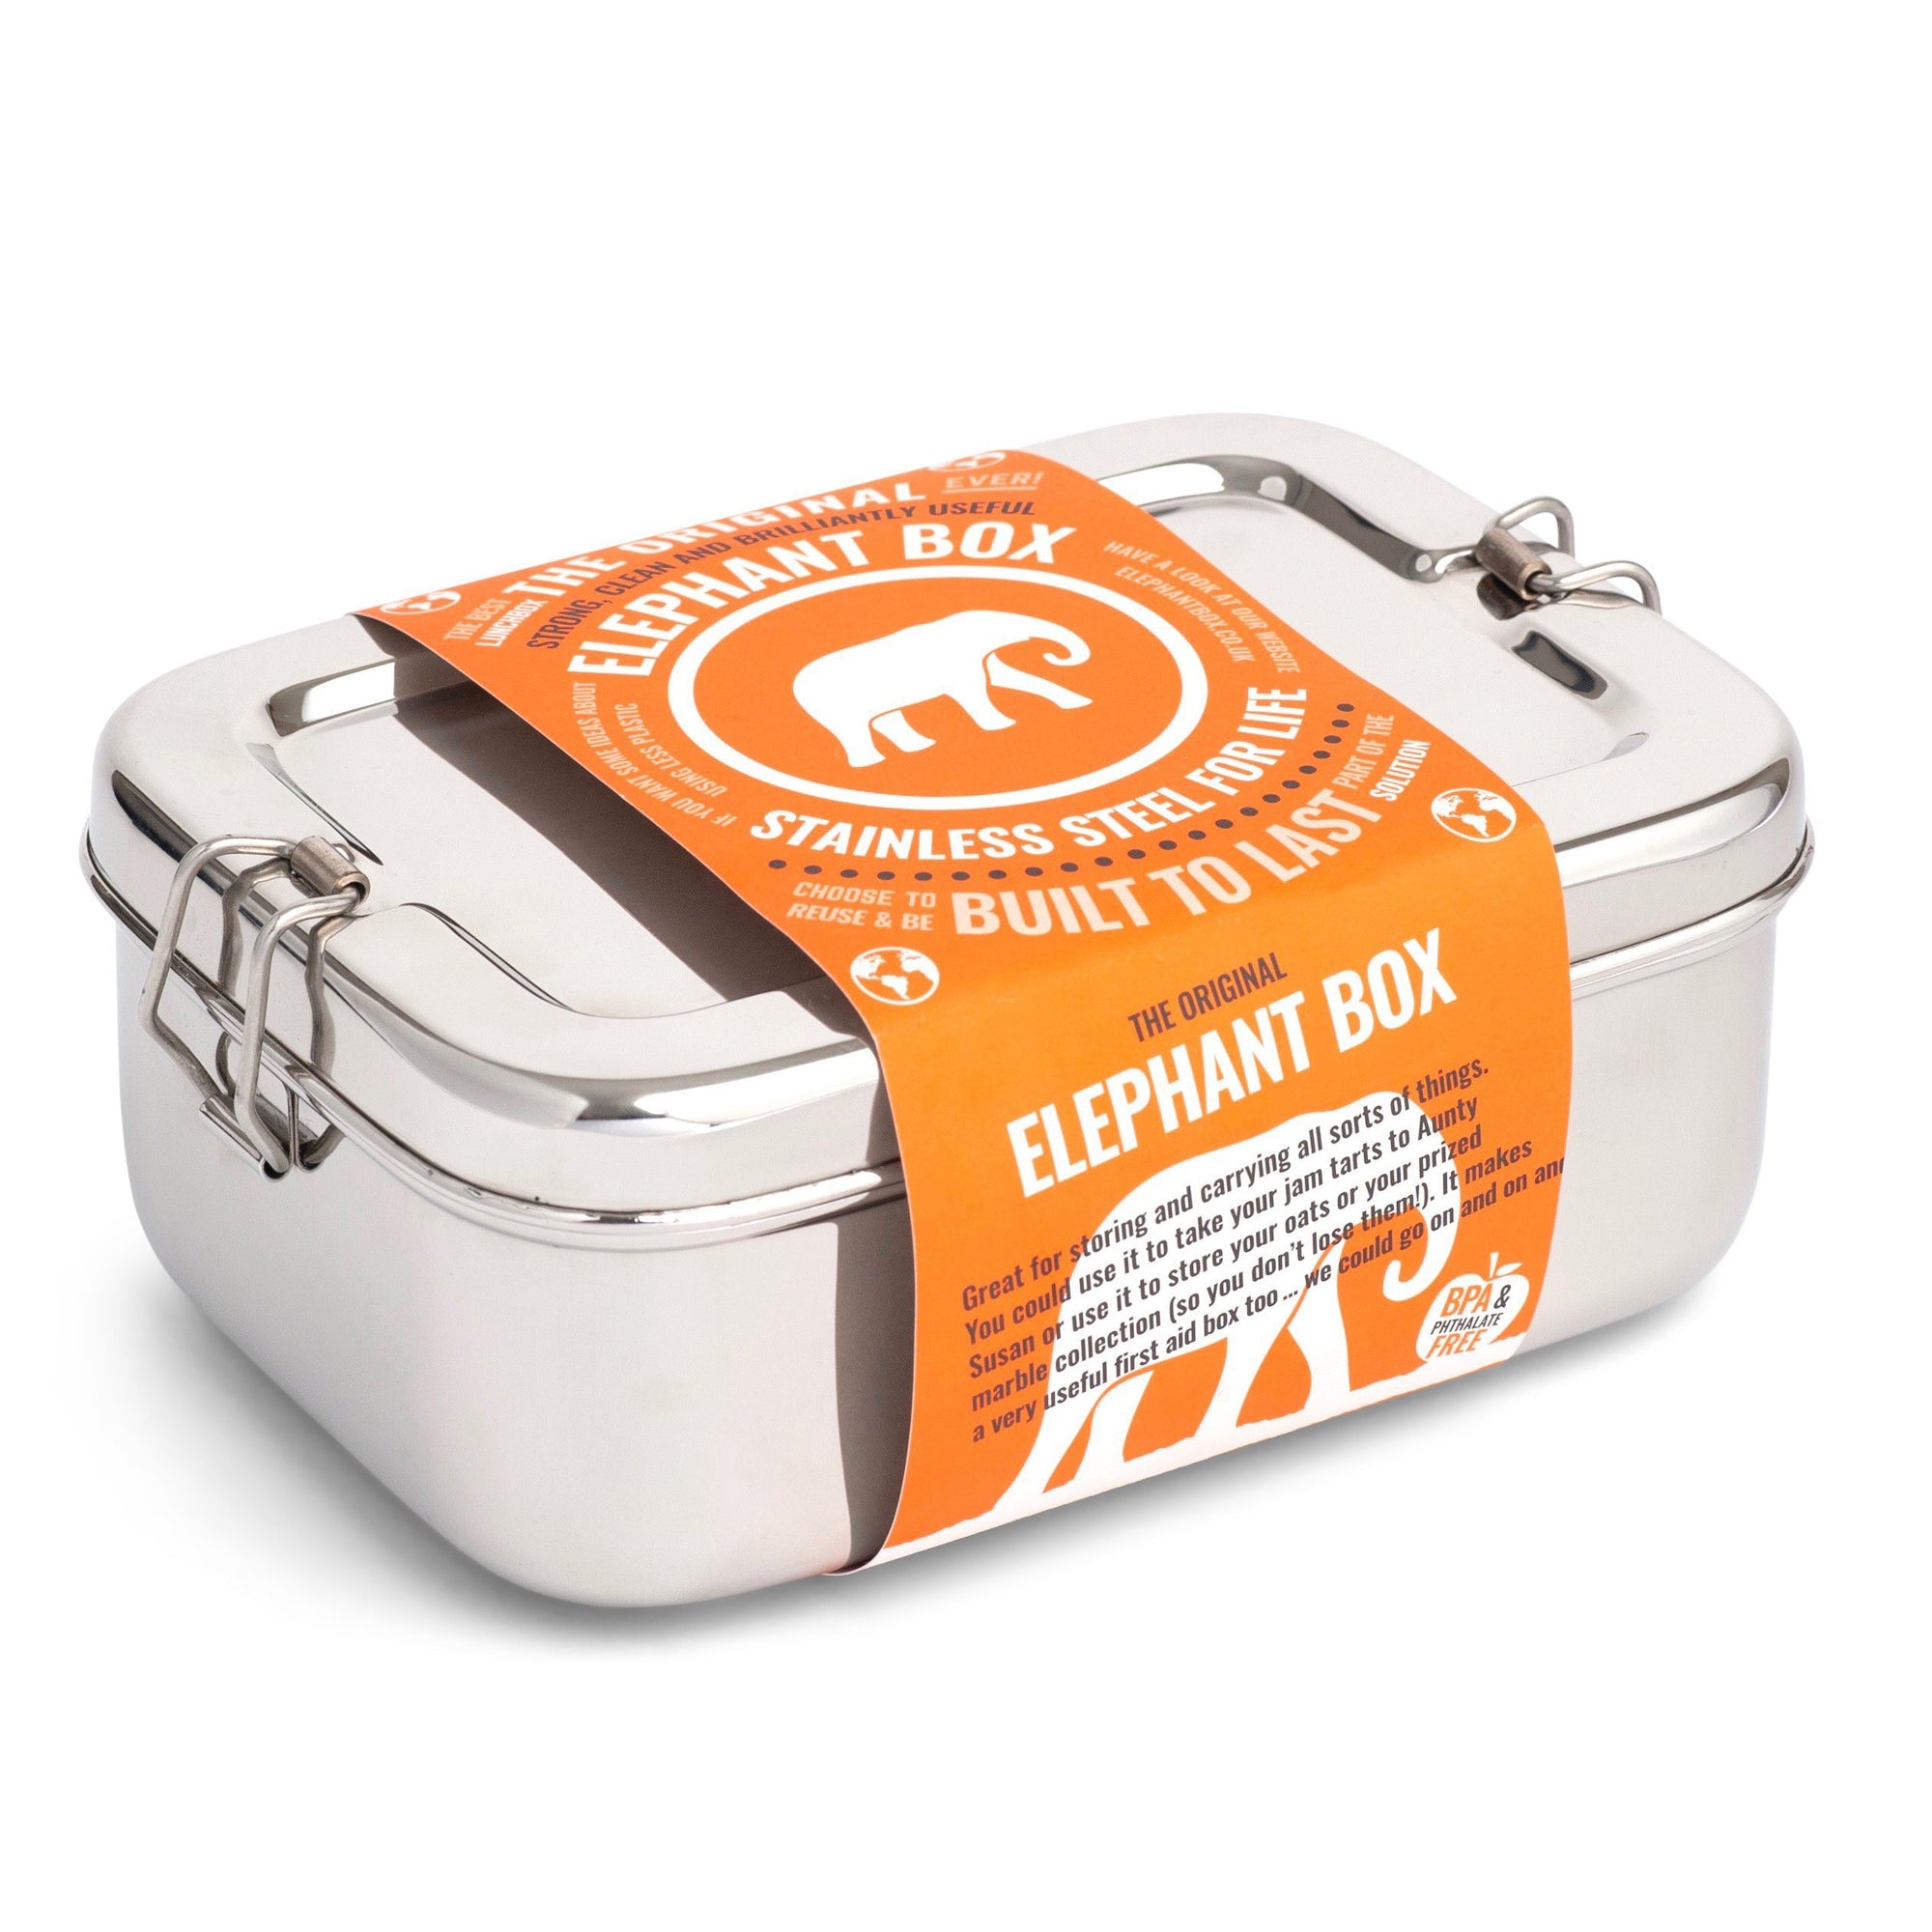 Elephant Box. Big Metal Lunchbox. stainless steel lunchbox with latch clips. 